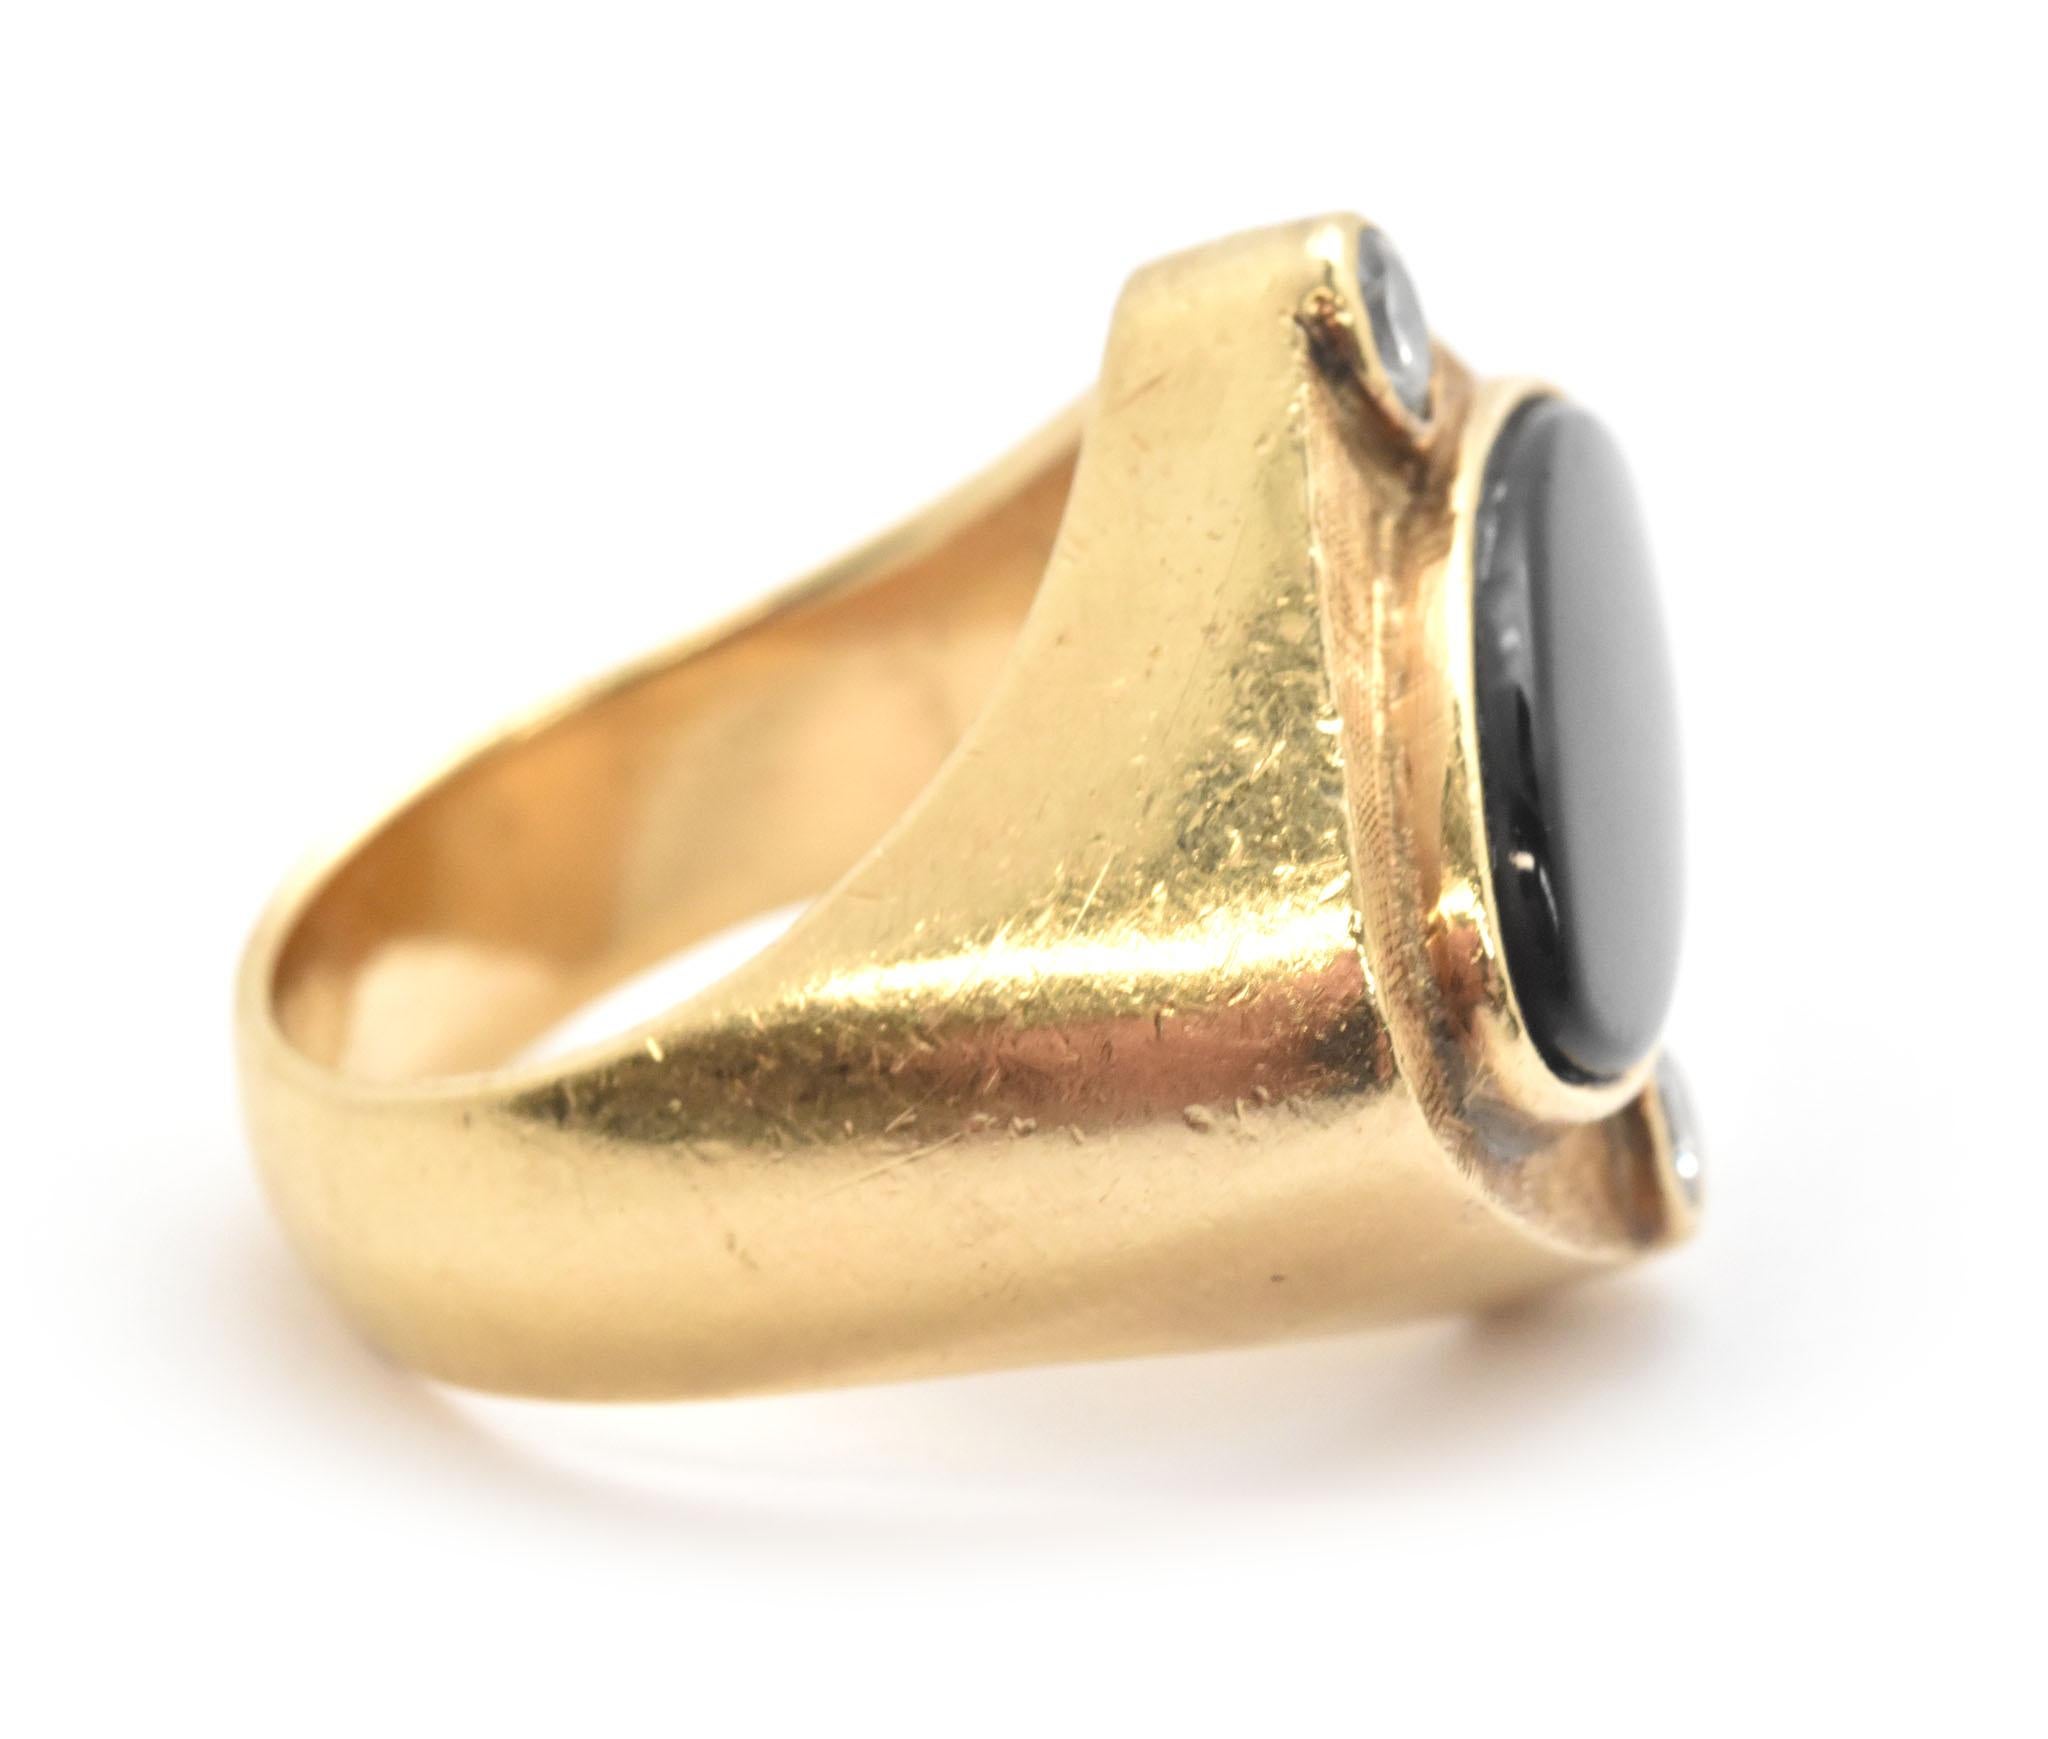 This ring is special, it is designed with 14k yellow gold. It is set with 2 round brilliant cut diamonds, and also a cabochon cut black onyx. The center gemstone is a cabochon black onyx it measures 20mm wide and 10mm tall. The diamonds on the ring